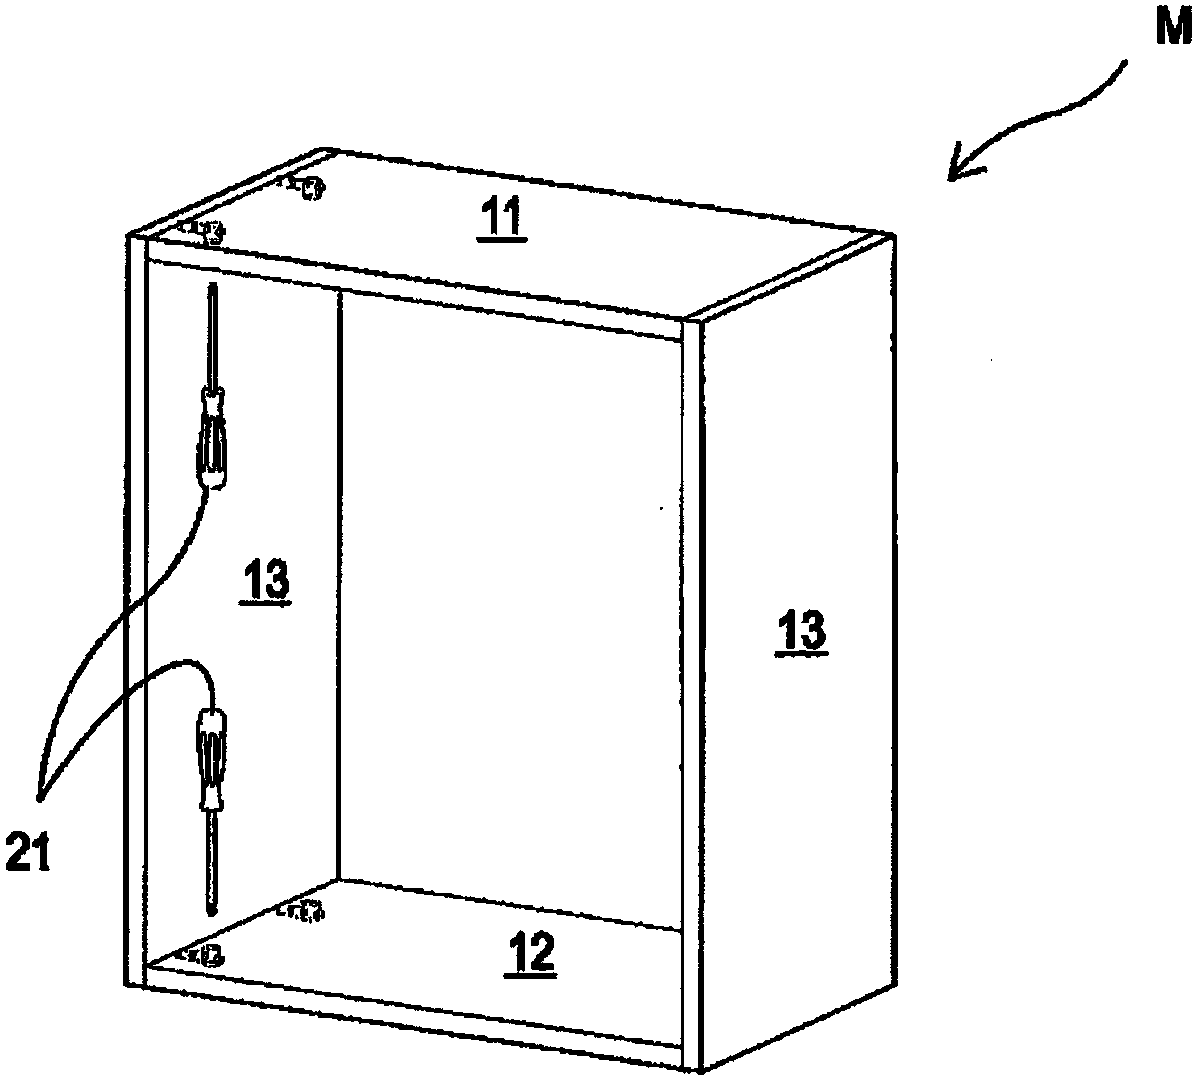 Barrel for a barrel joint for parts of furniture and furnishing items